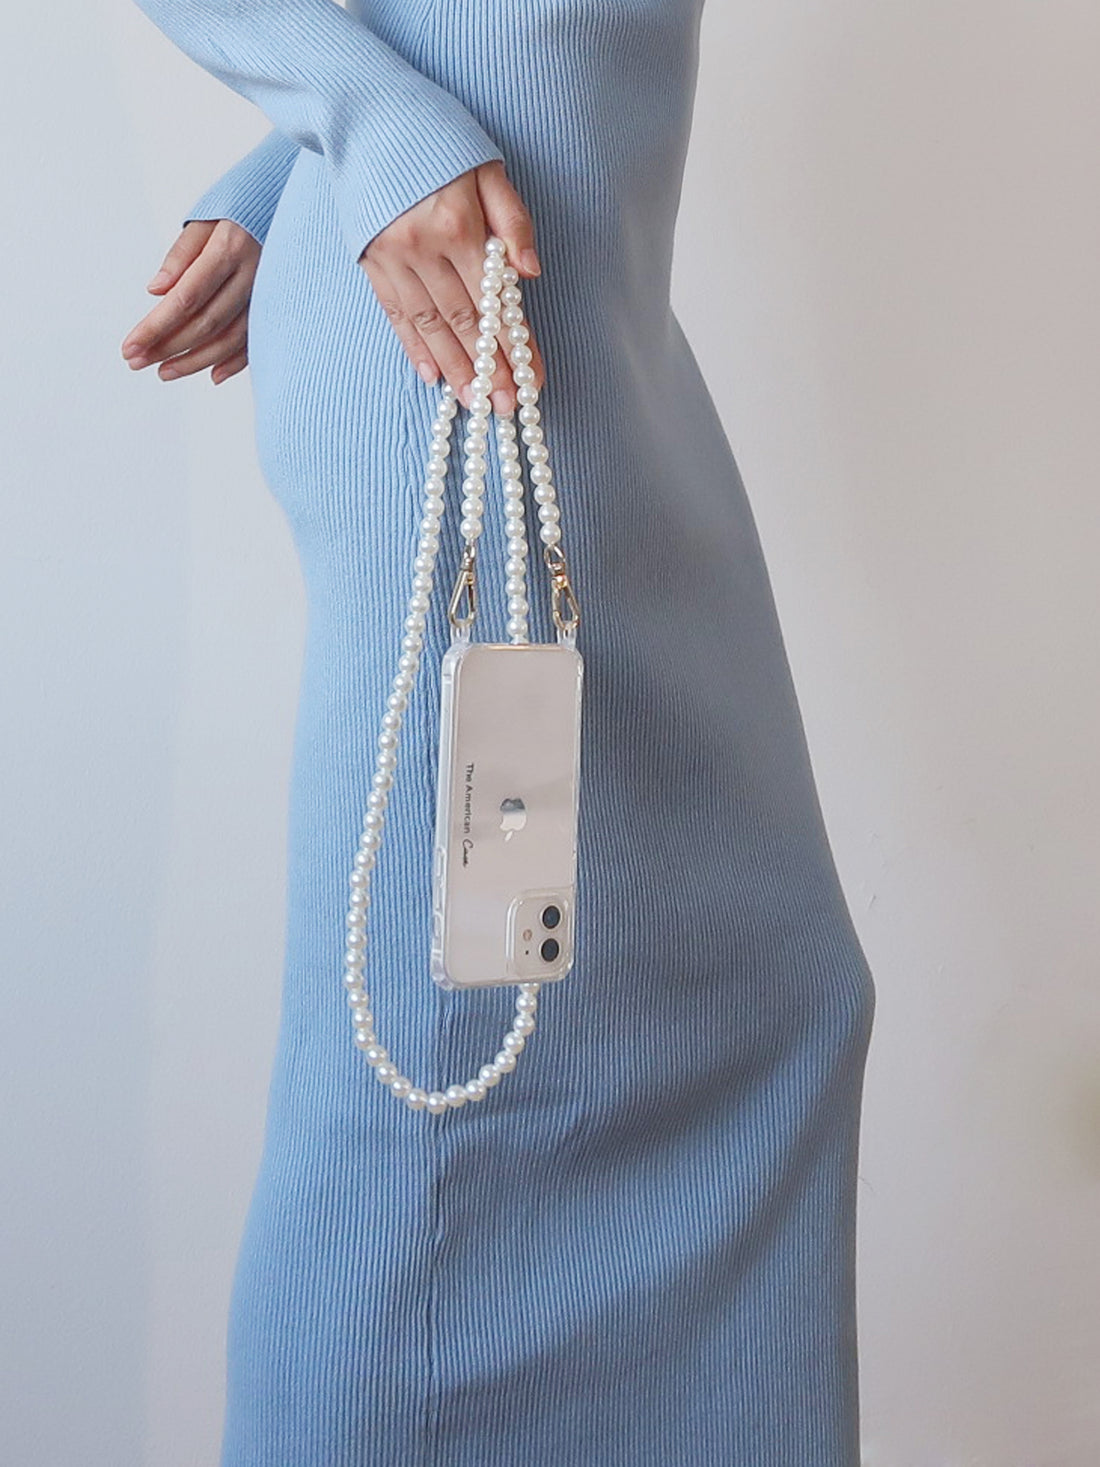 White Pearl Chain with Silver Carabiners attached to phone hold by a lady